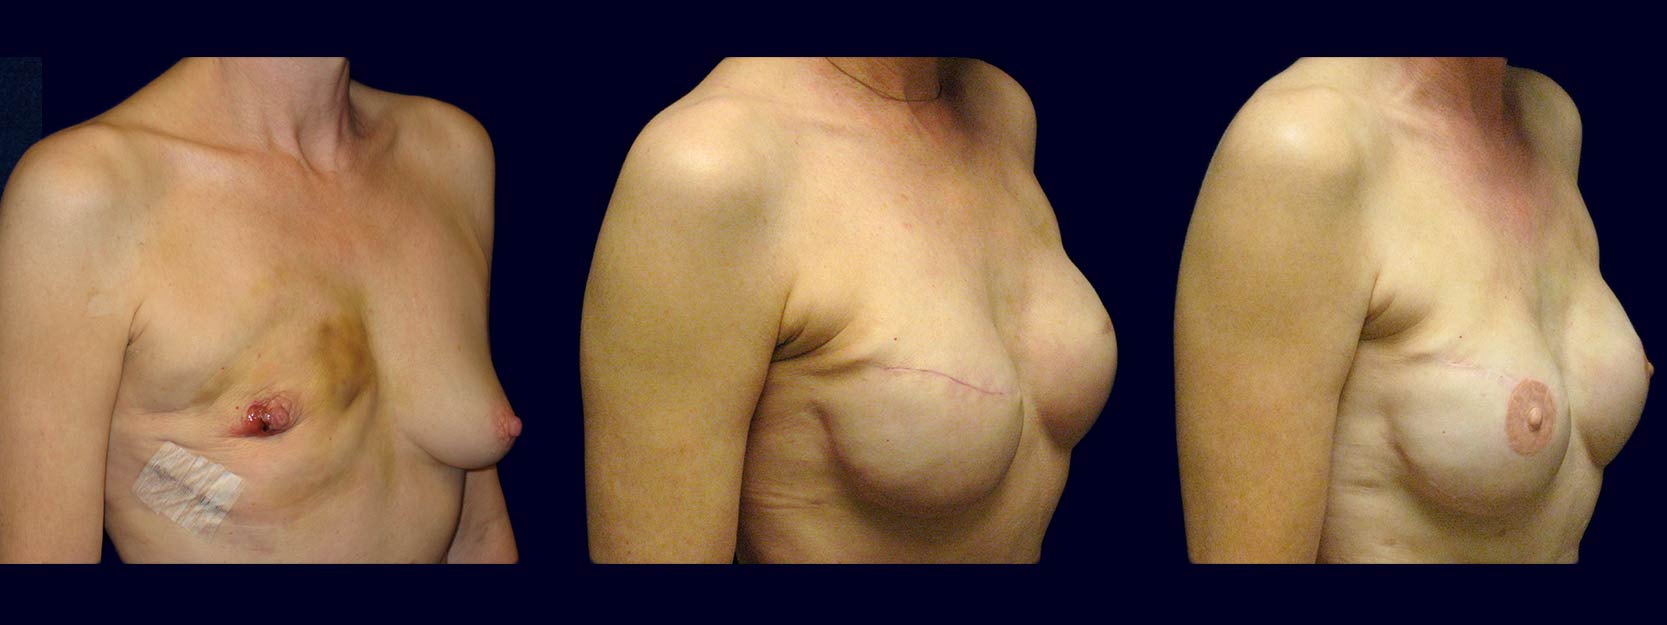 Right 3/4 View - Breast Reconstruction